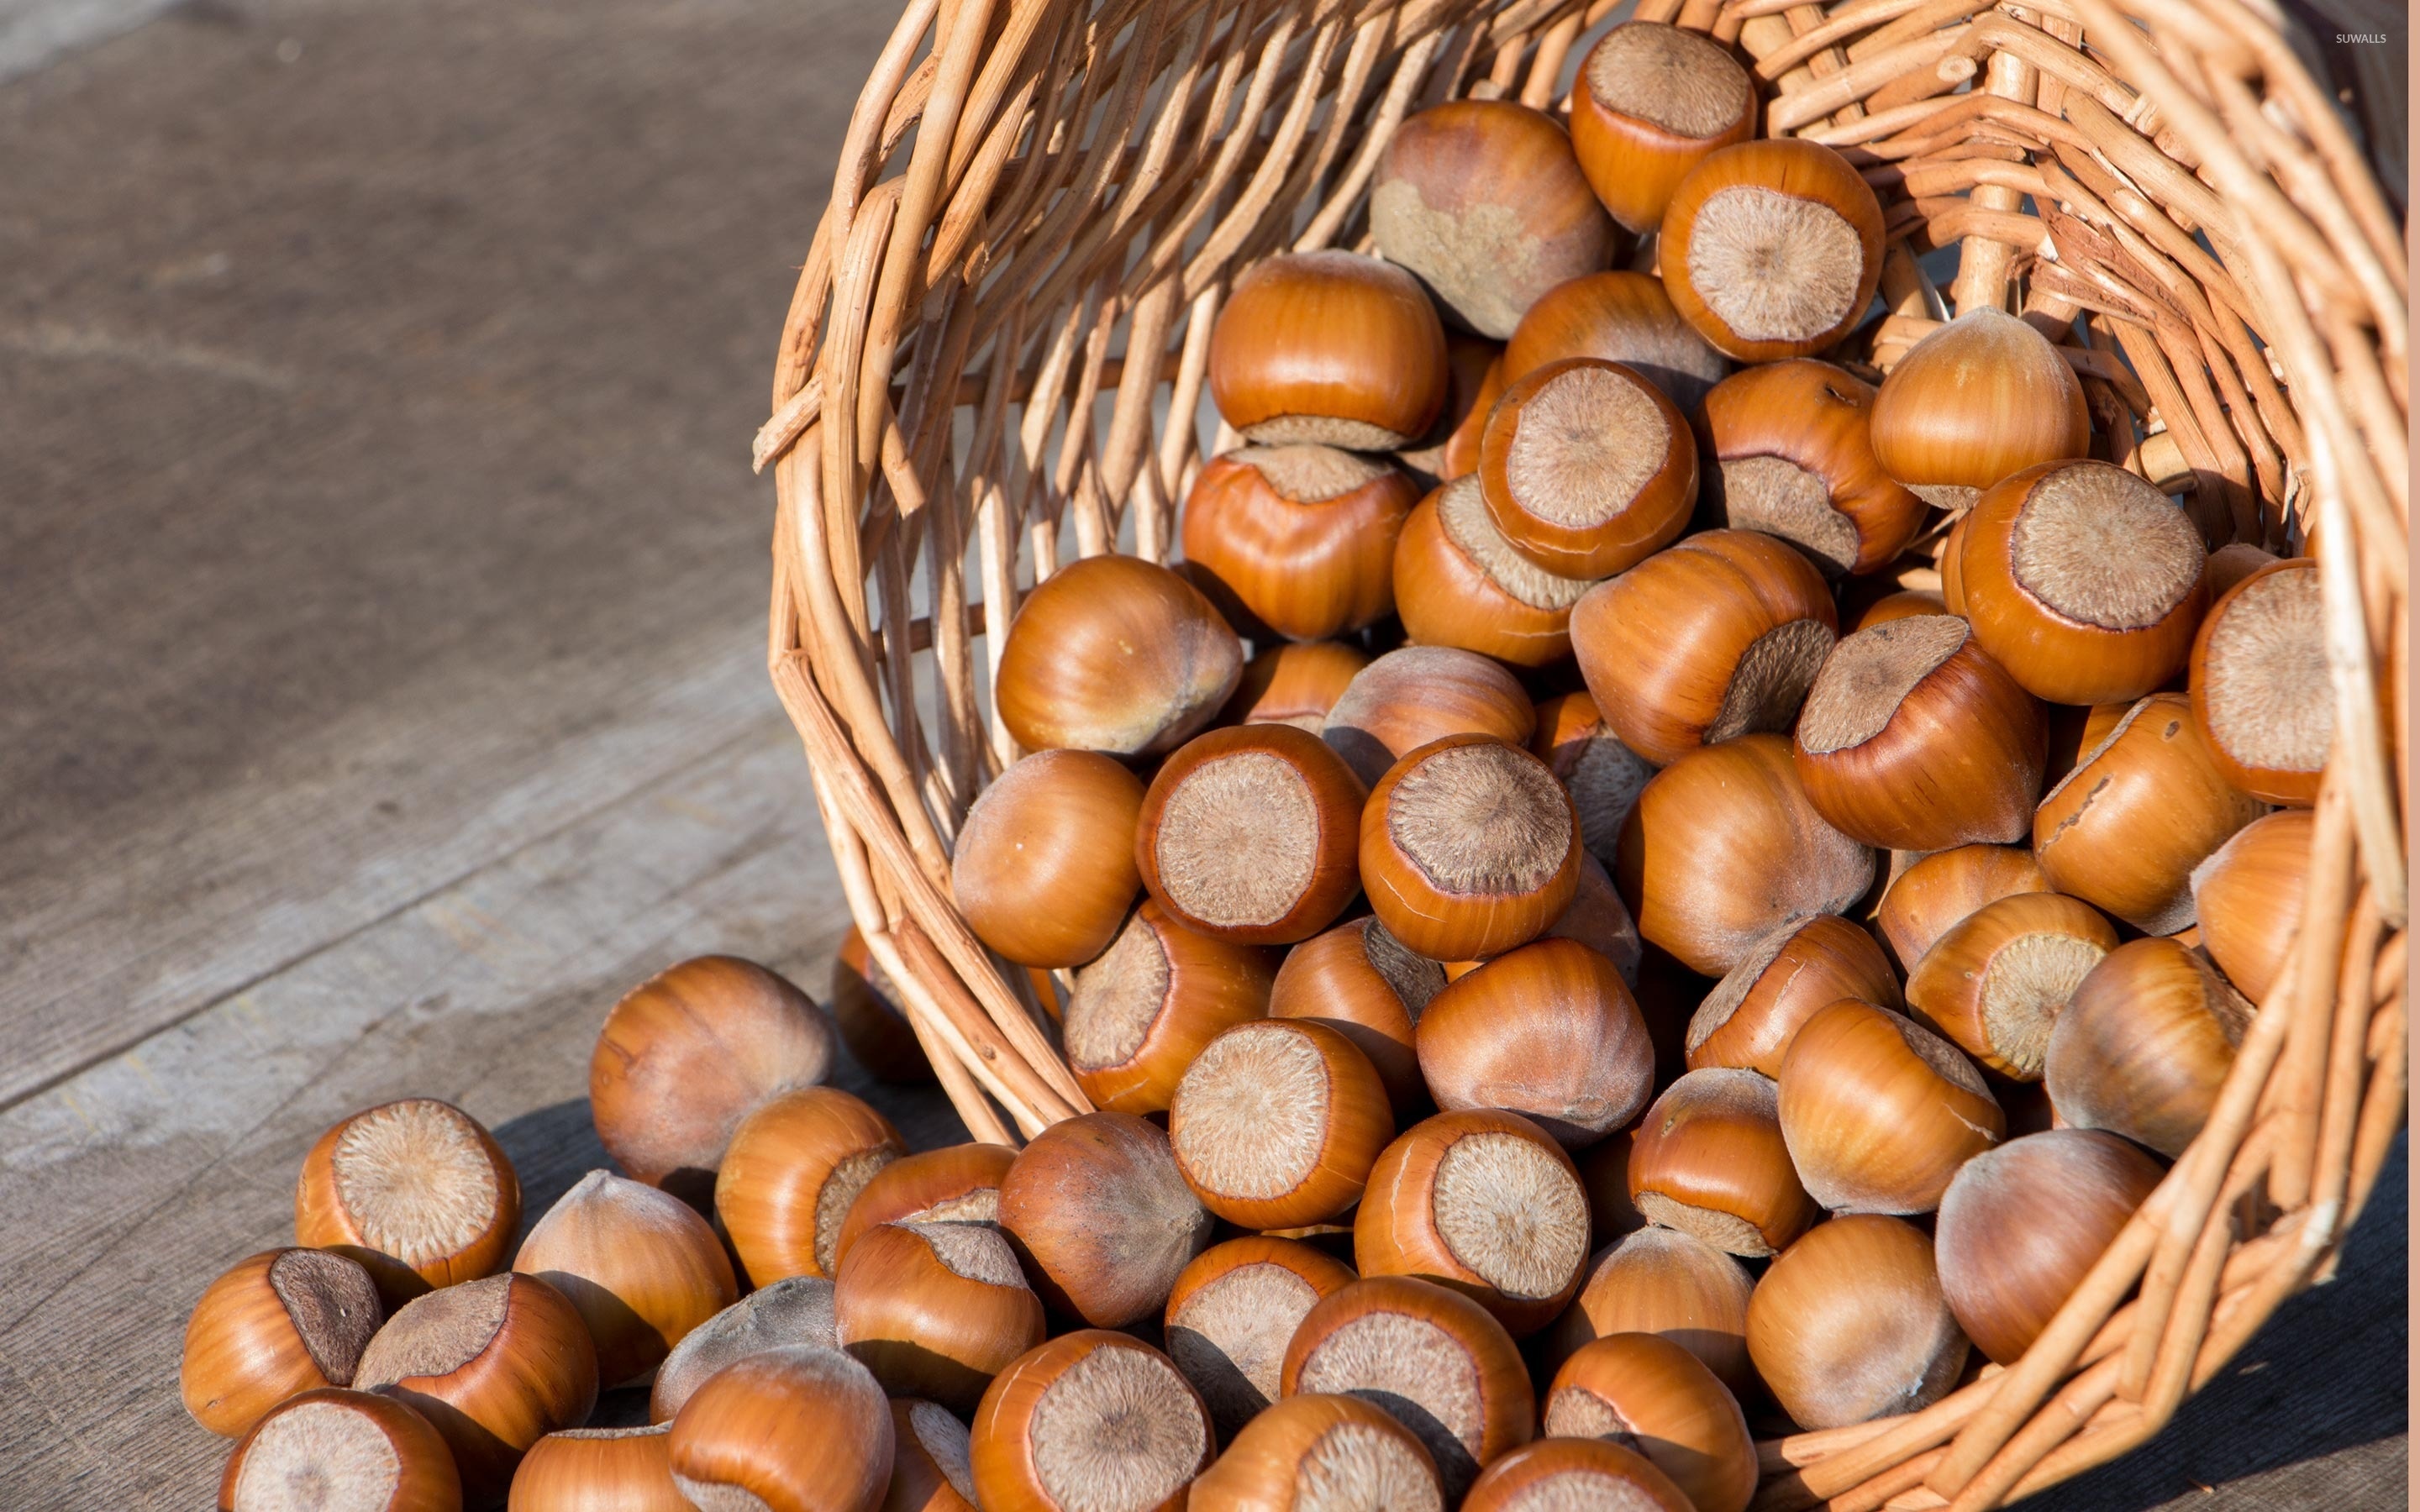 Hazelnuts: Have ability to balance cholesterol levels and prevent cancer. 2880x1800 HD Wallpaper.